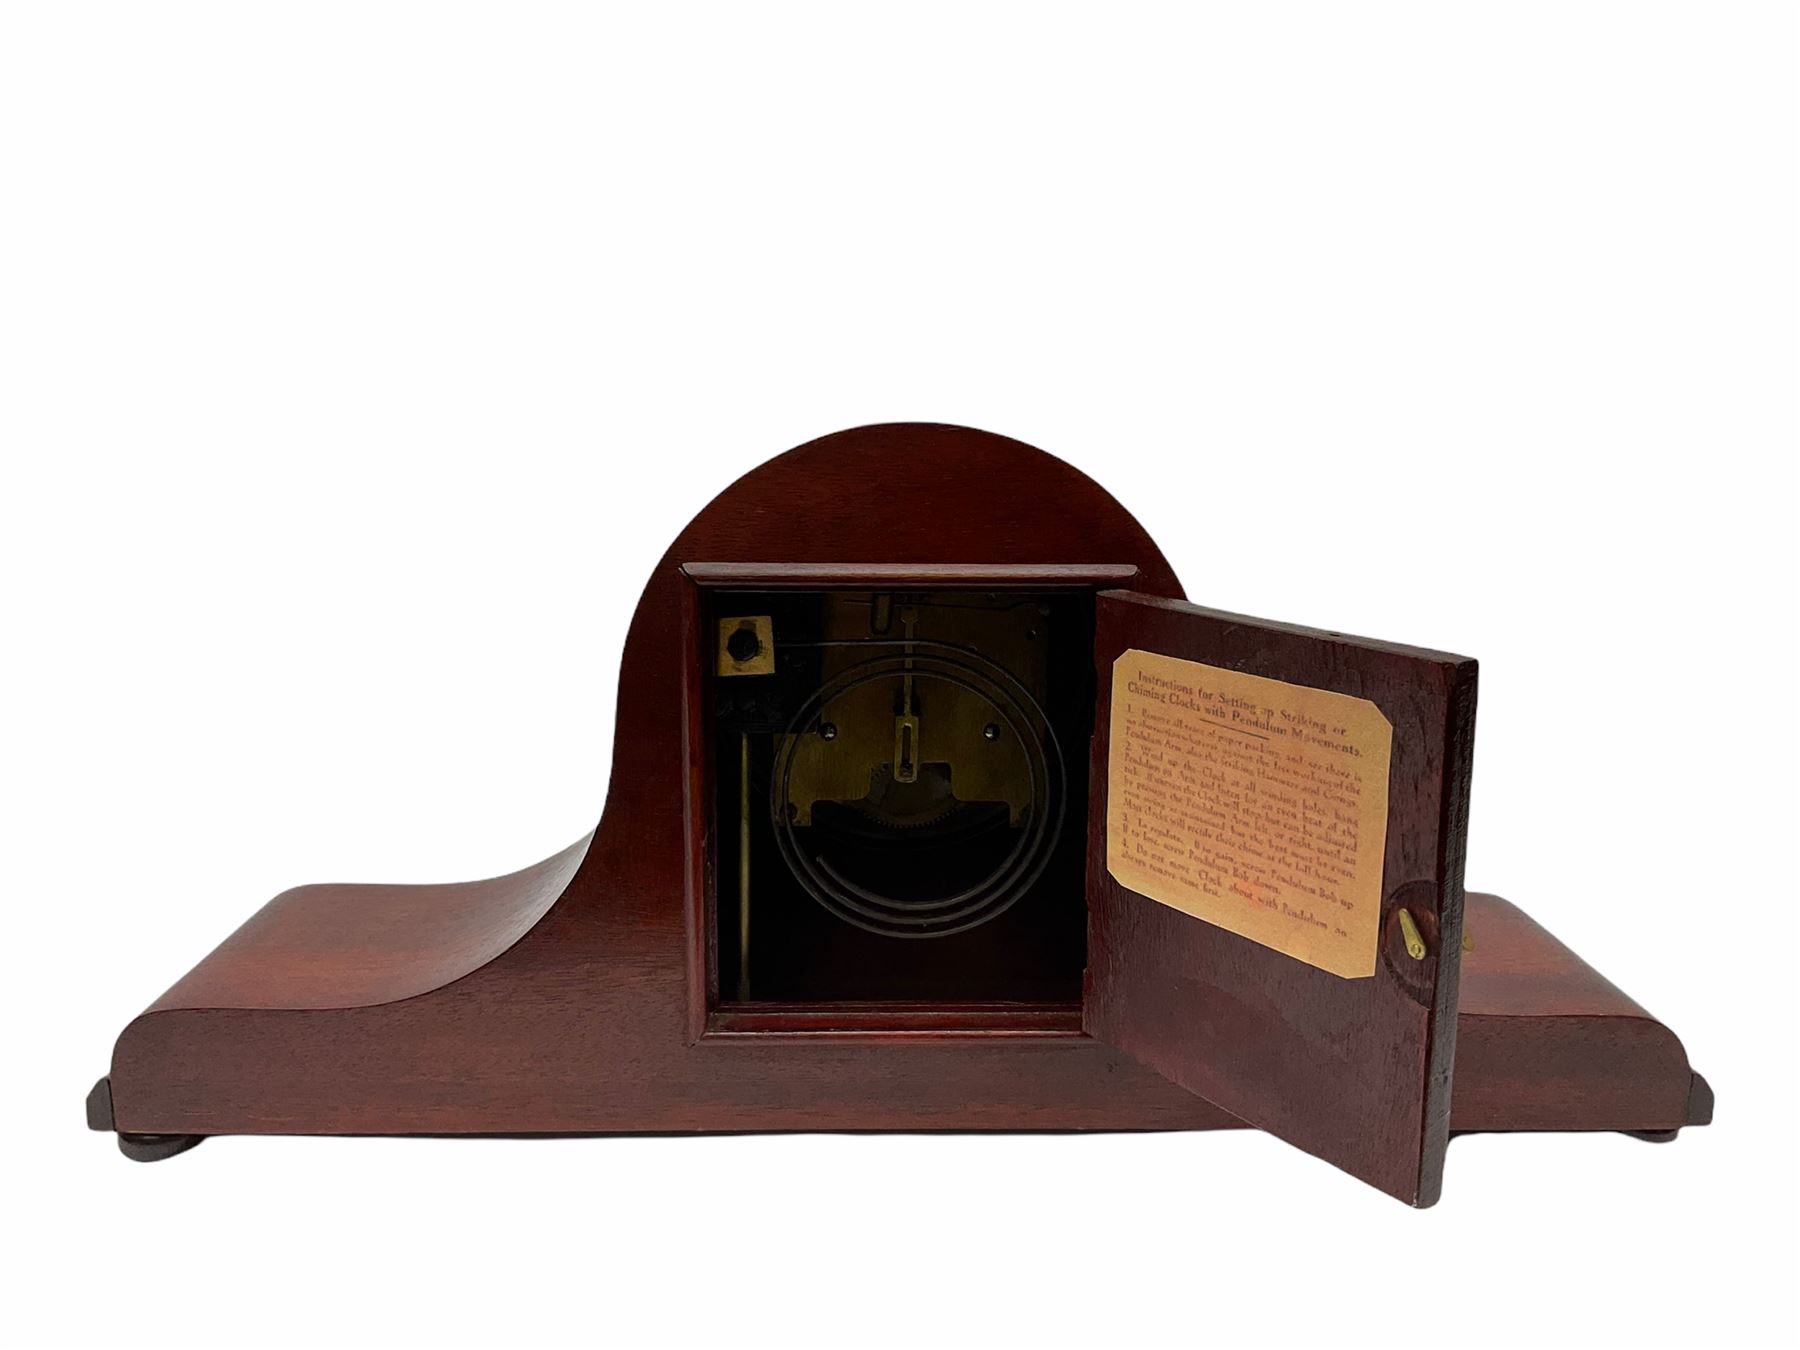 Mid-20th century Mahogany finished Tambour mantle clock with an eight-day striking movement - Image 3 of 3